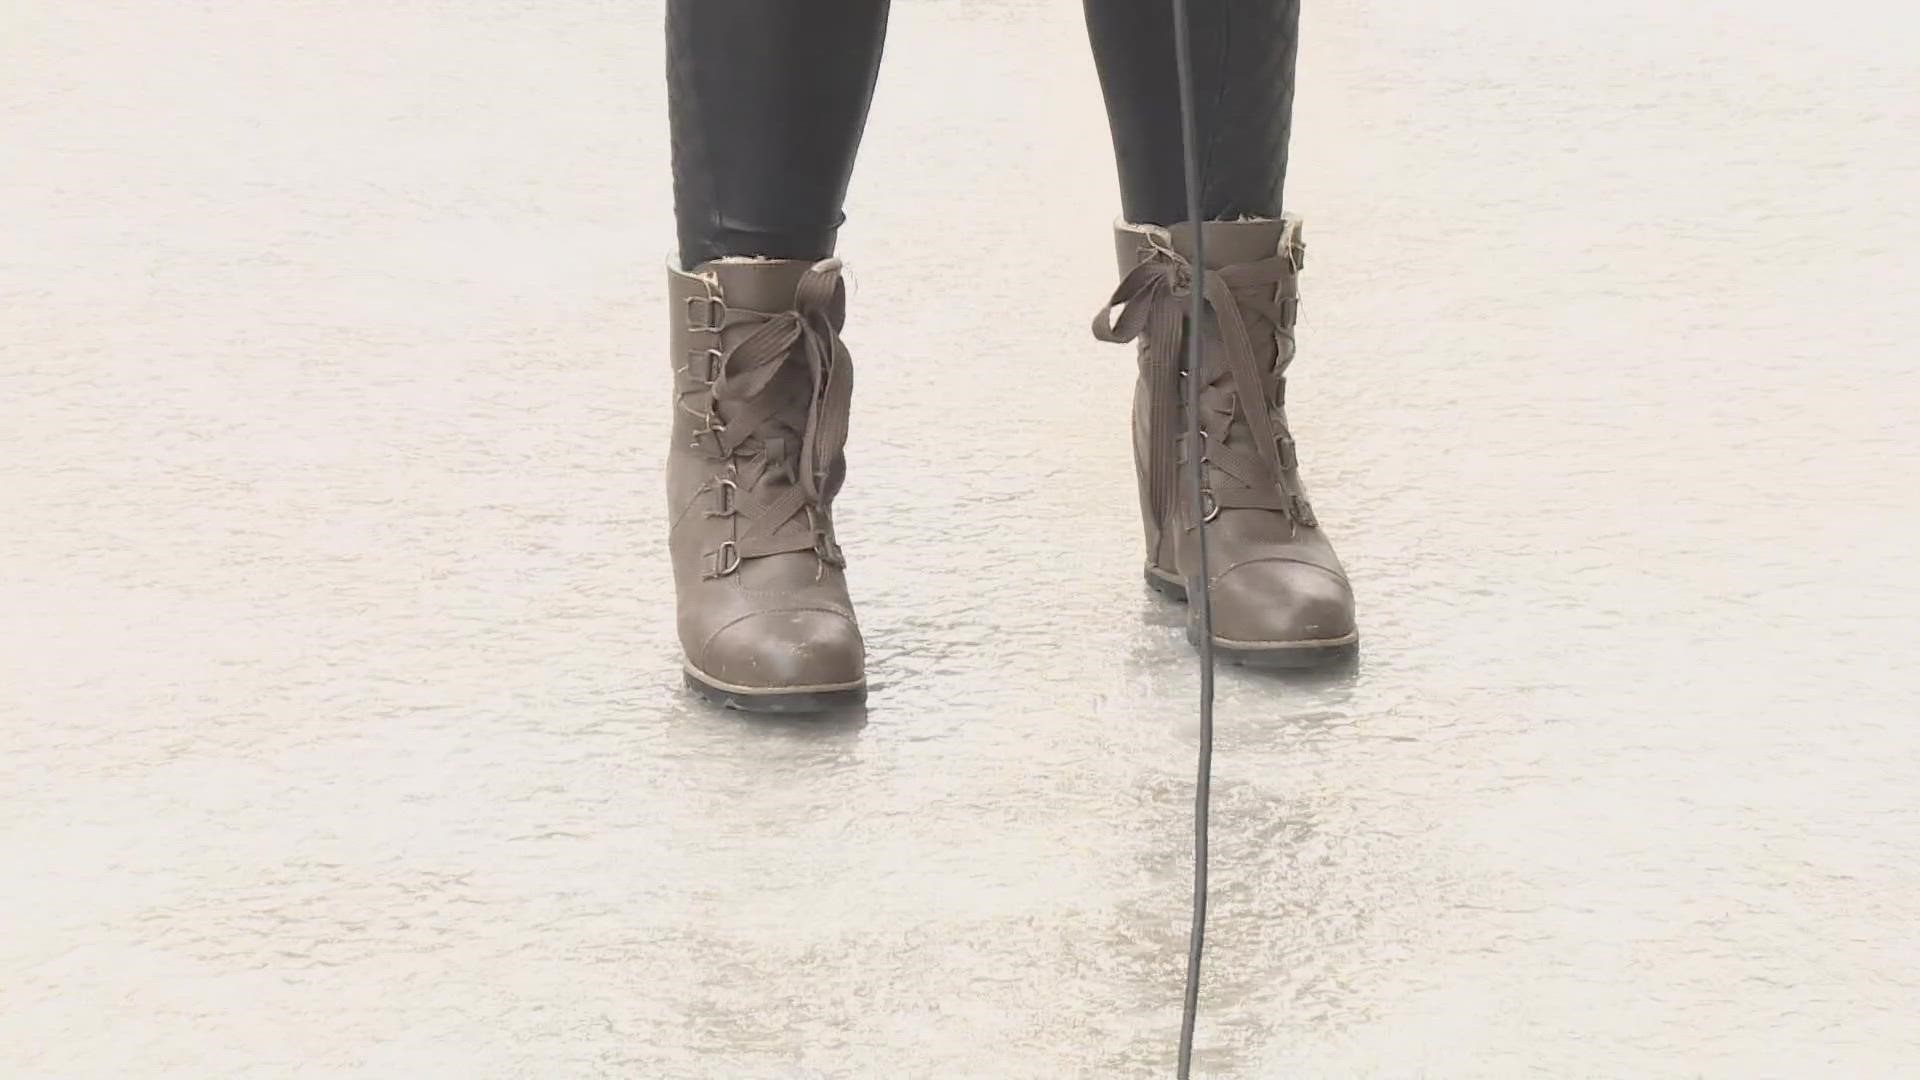 Hannah Davis of WFAA's "Good Morning Texas" is reminding everyone to watch their steps if they're going to be outside in the wintry weather.